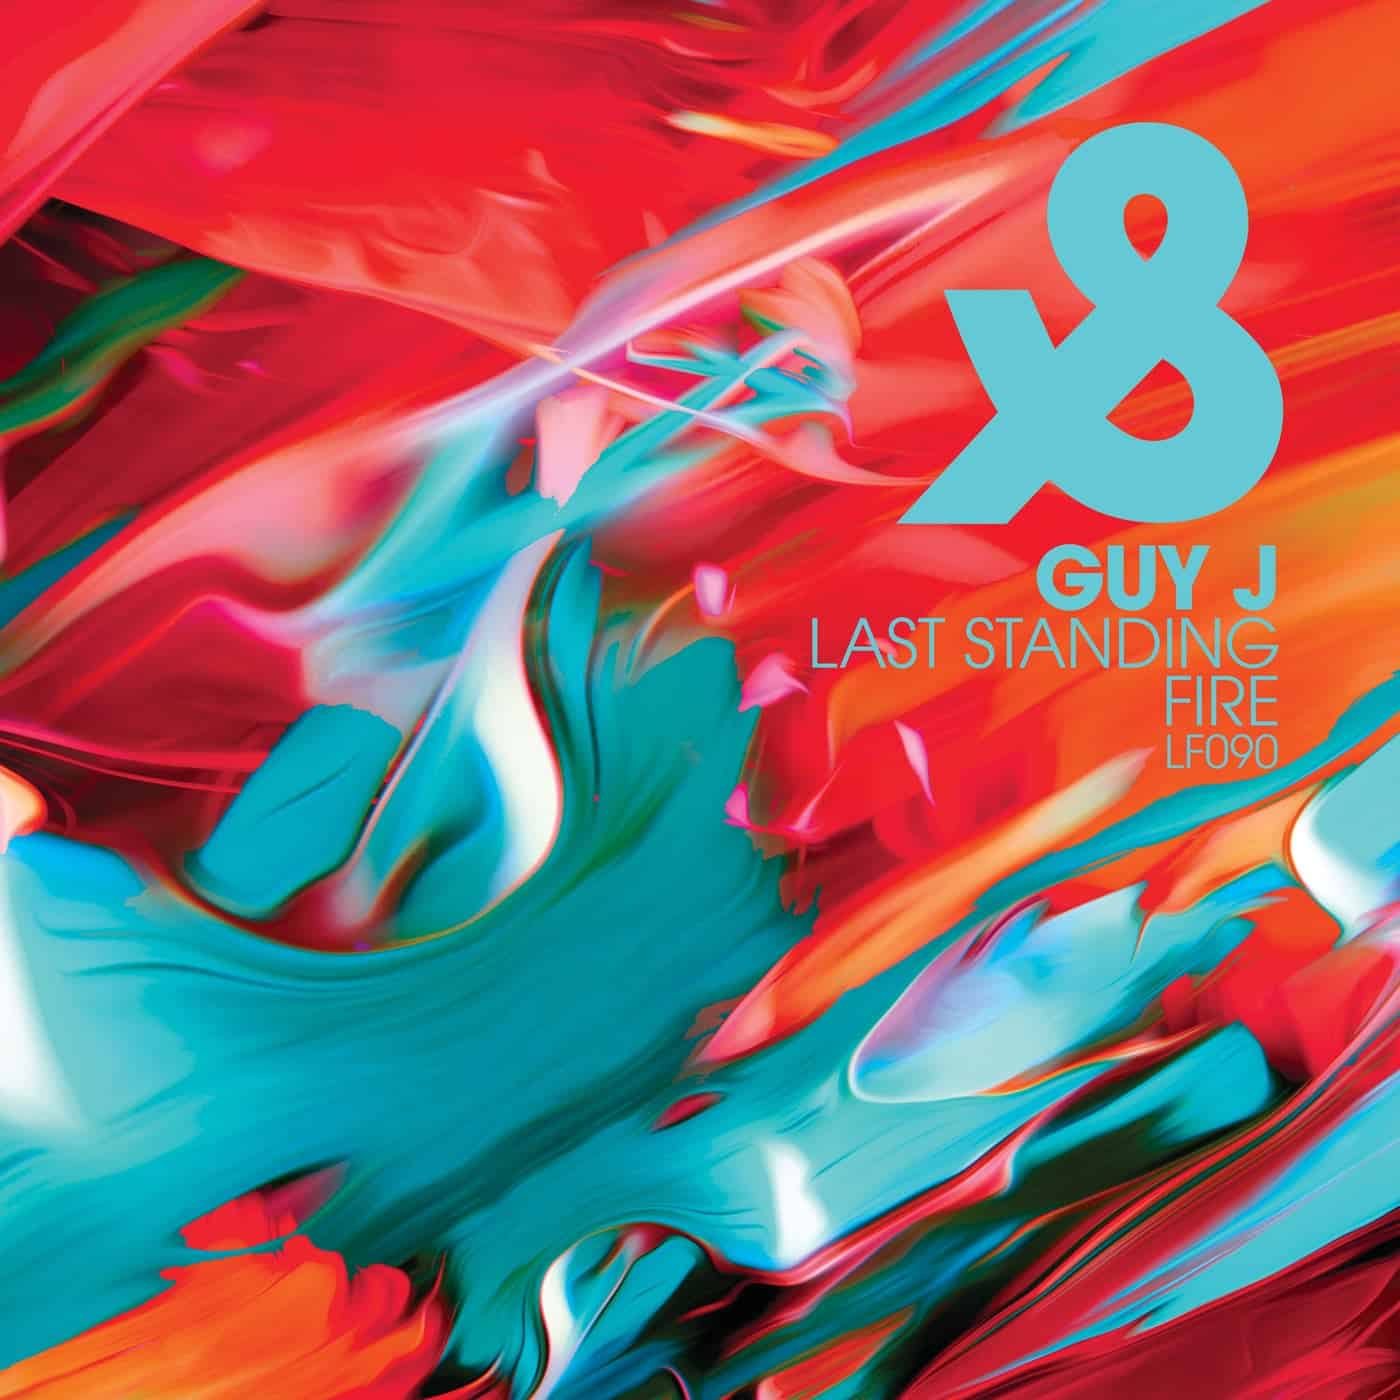 image cover: Guy J - Last Standing / Fire / LF090D